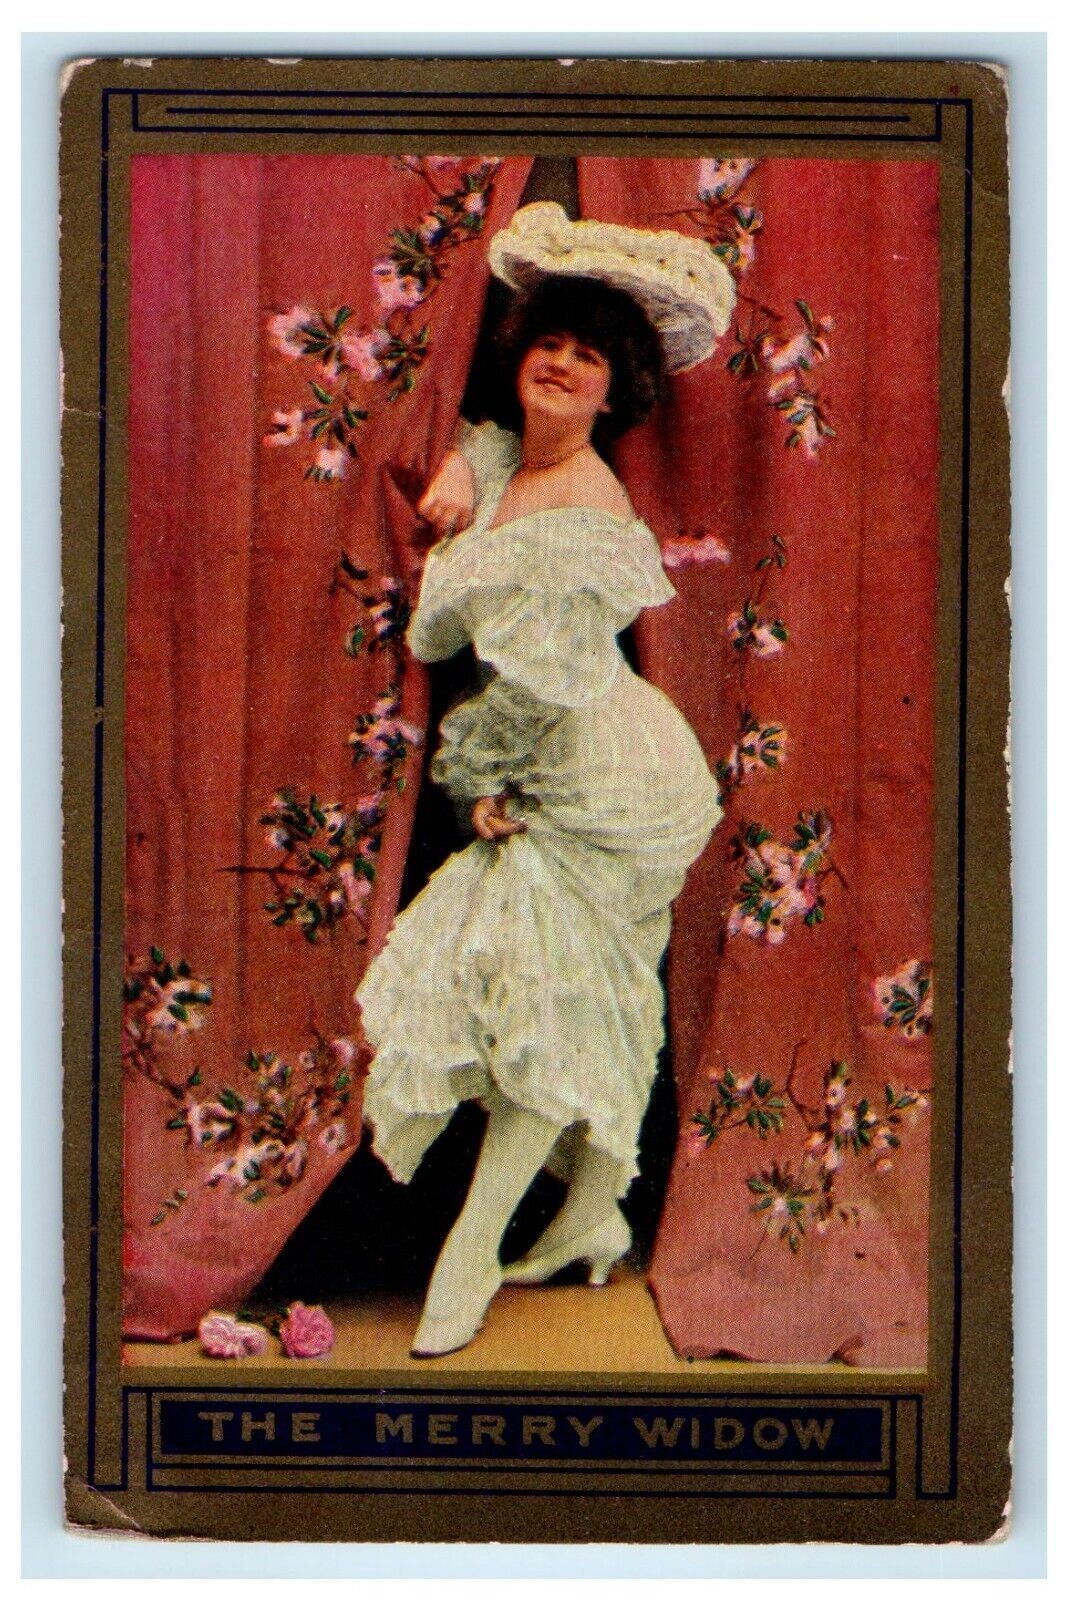 1909 The Merry Widow Pretty Girl Dress White Floral Curtain Antique Postcard